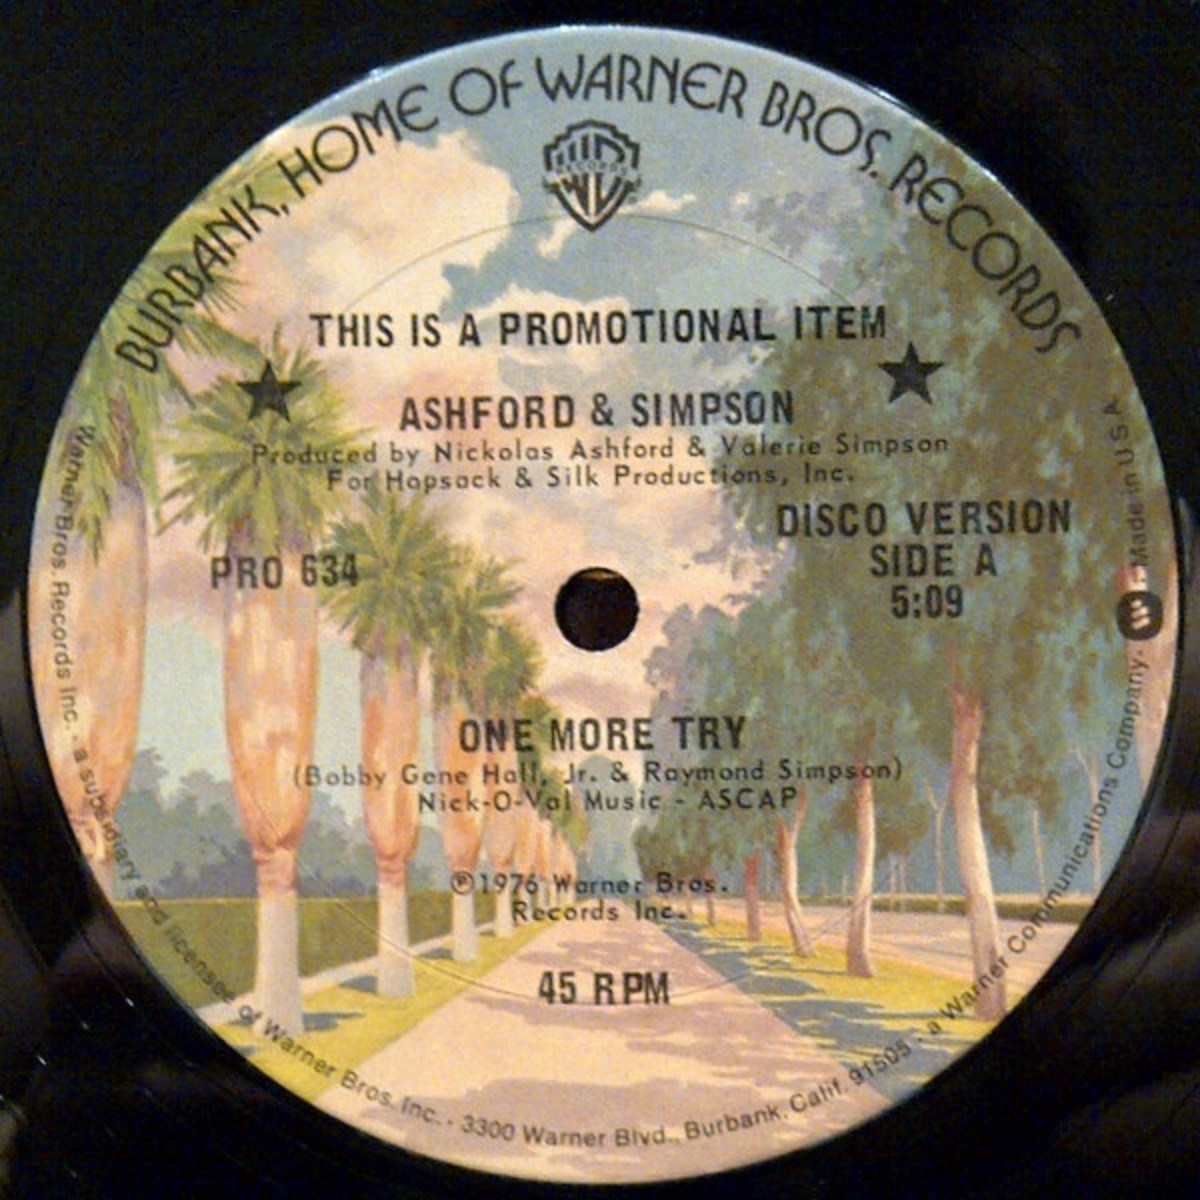 AshFord and Simpson - one more try